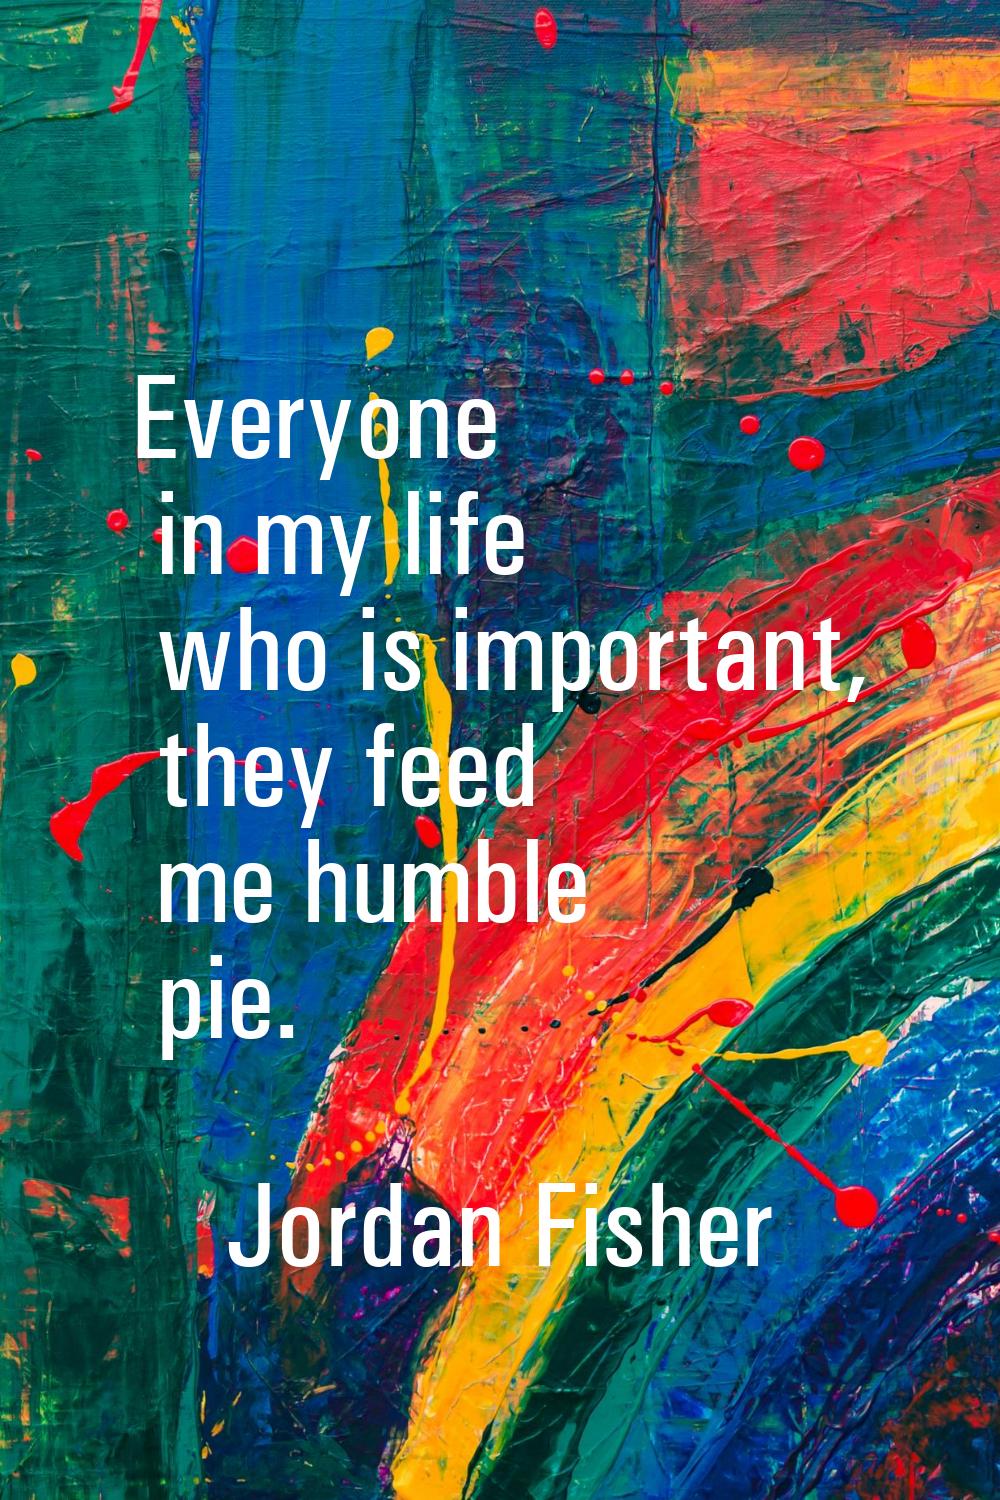 Everyone in my life who is important, they feed me humble pie.